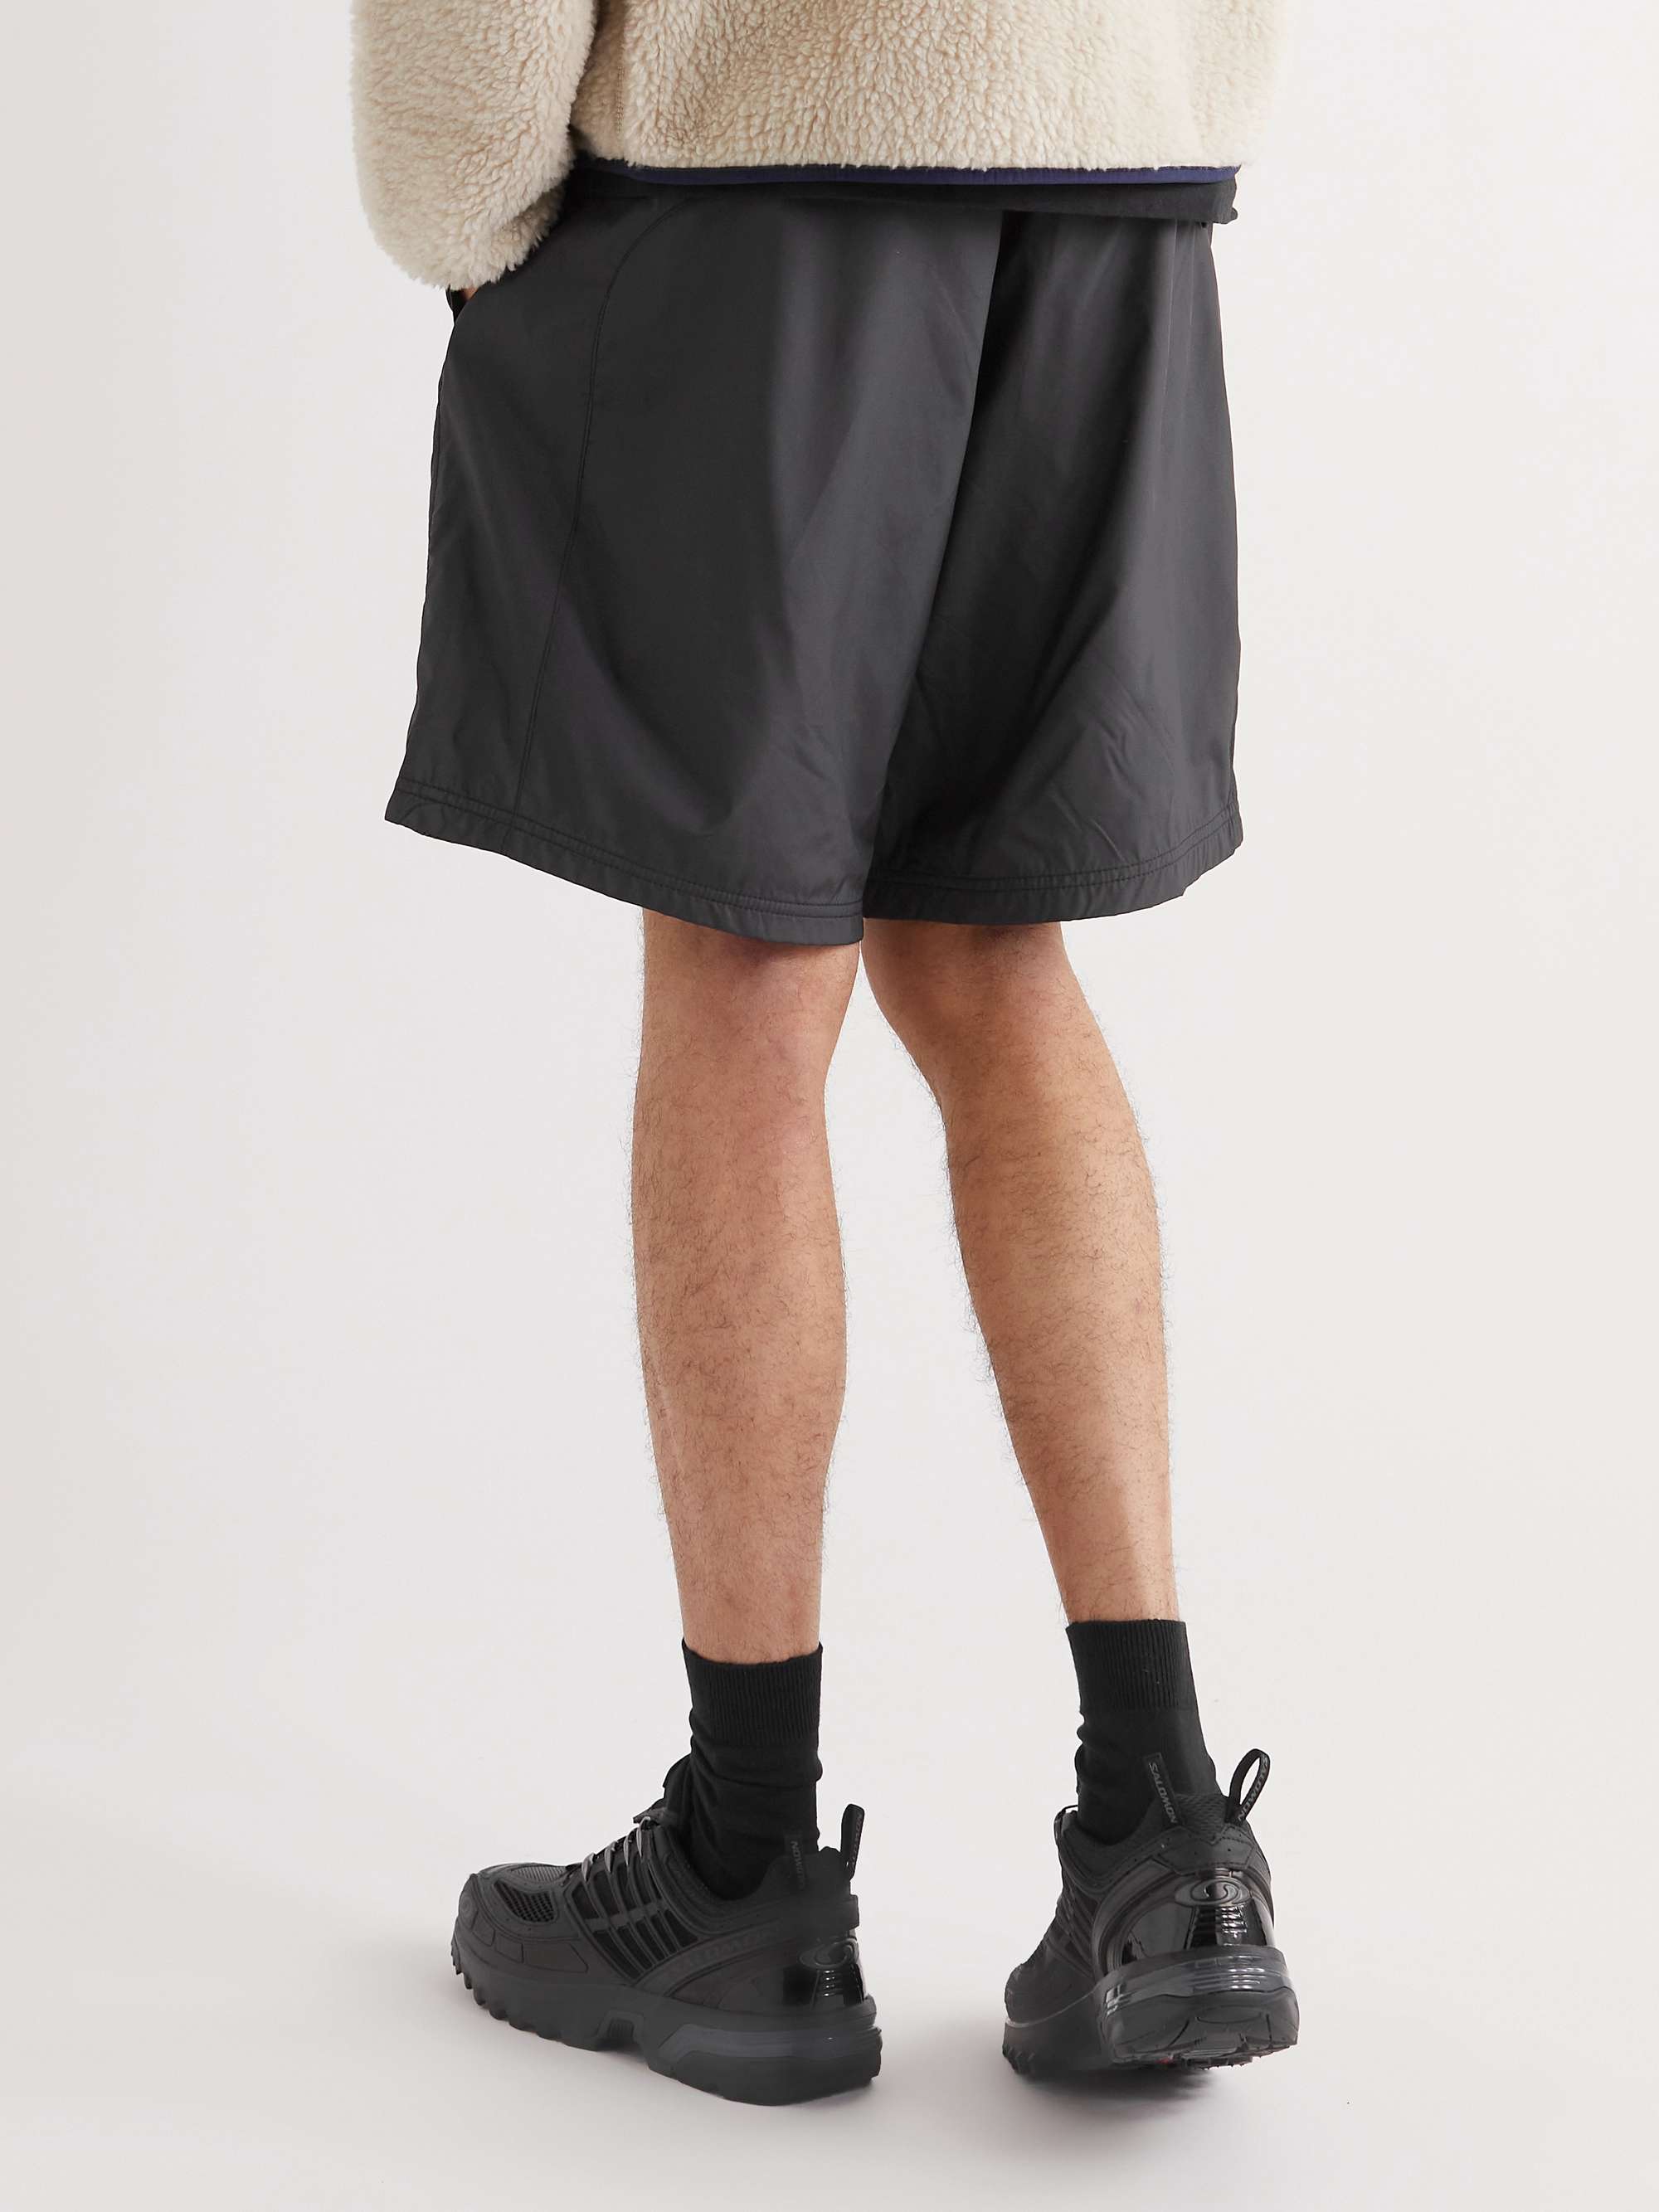 THE NORTH FACE Hydrenaline Straight-Leg Logo-Print Recycled Shell Shorts